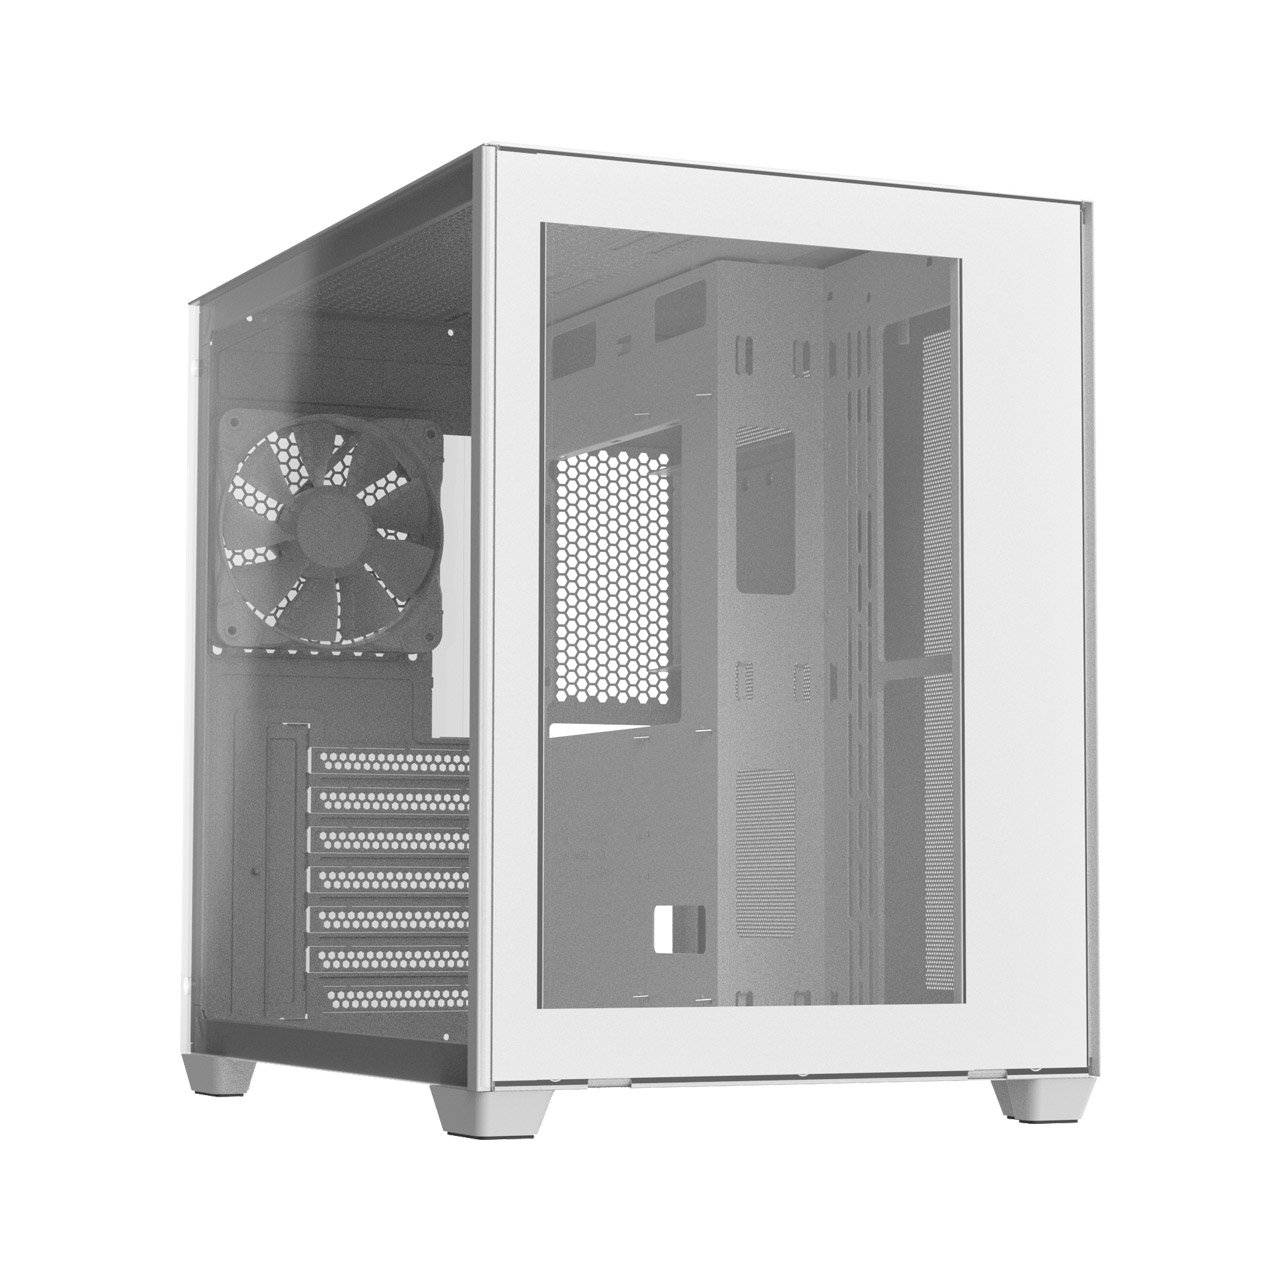 FSP CMT380W ATX Gaming Chassis – White